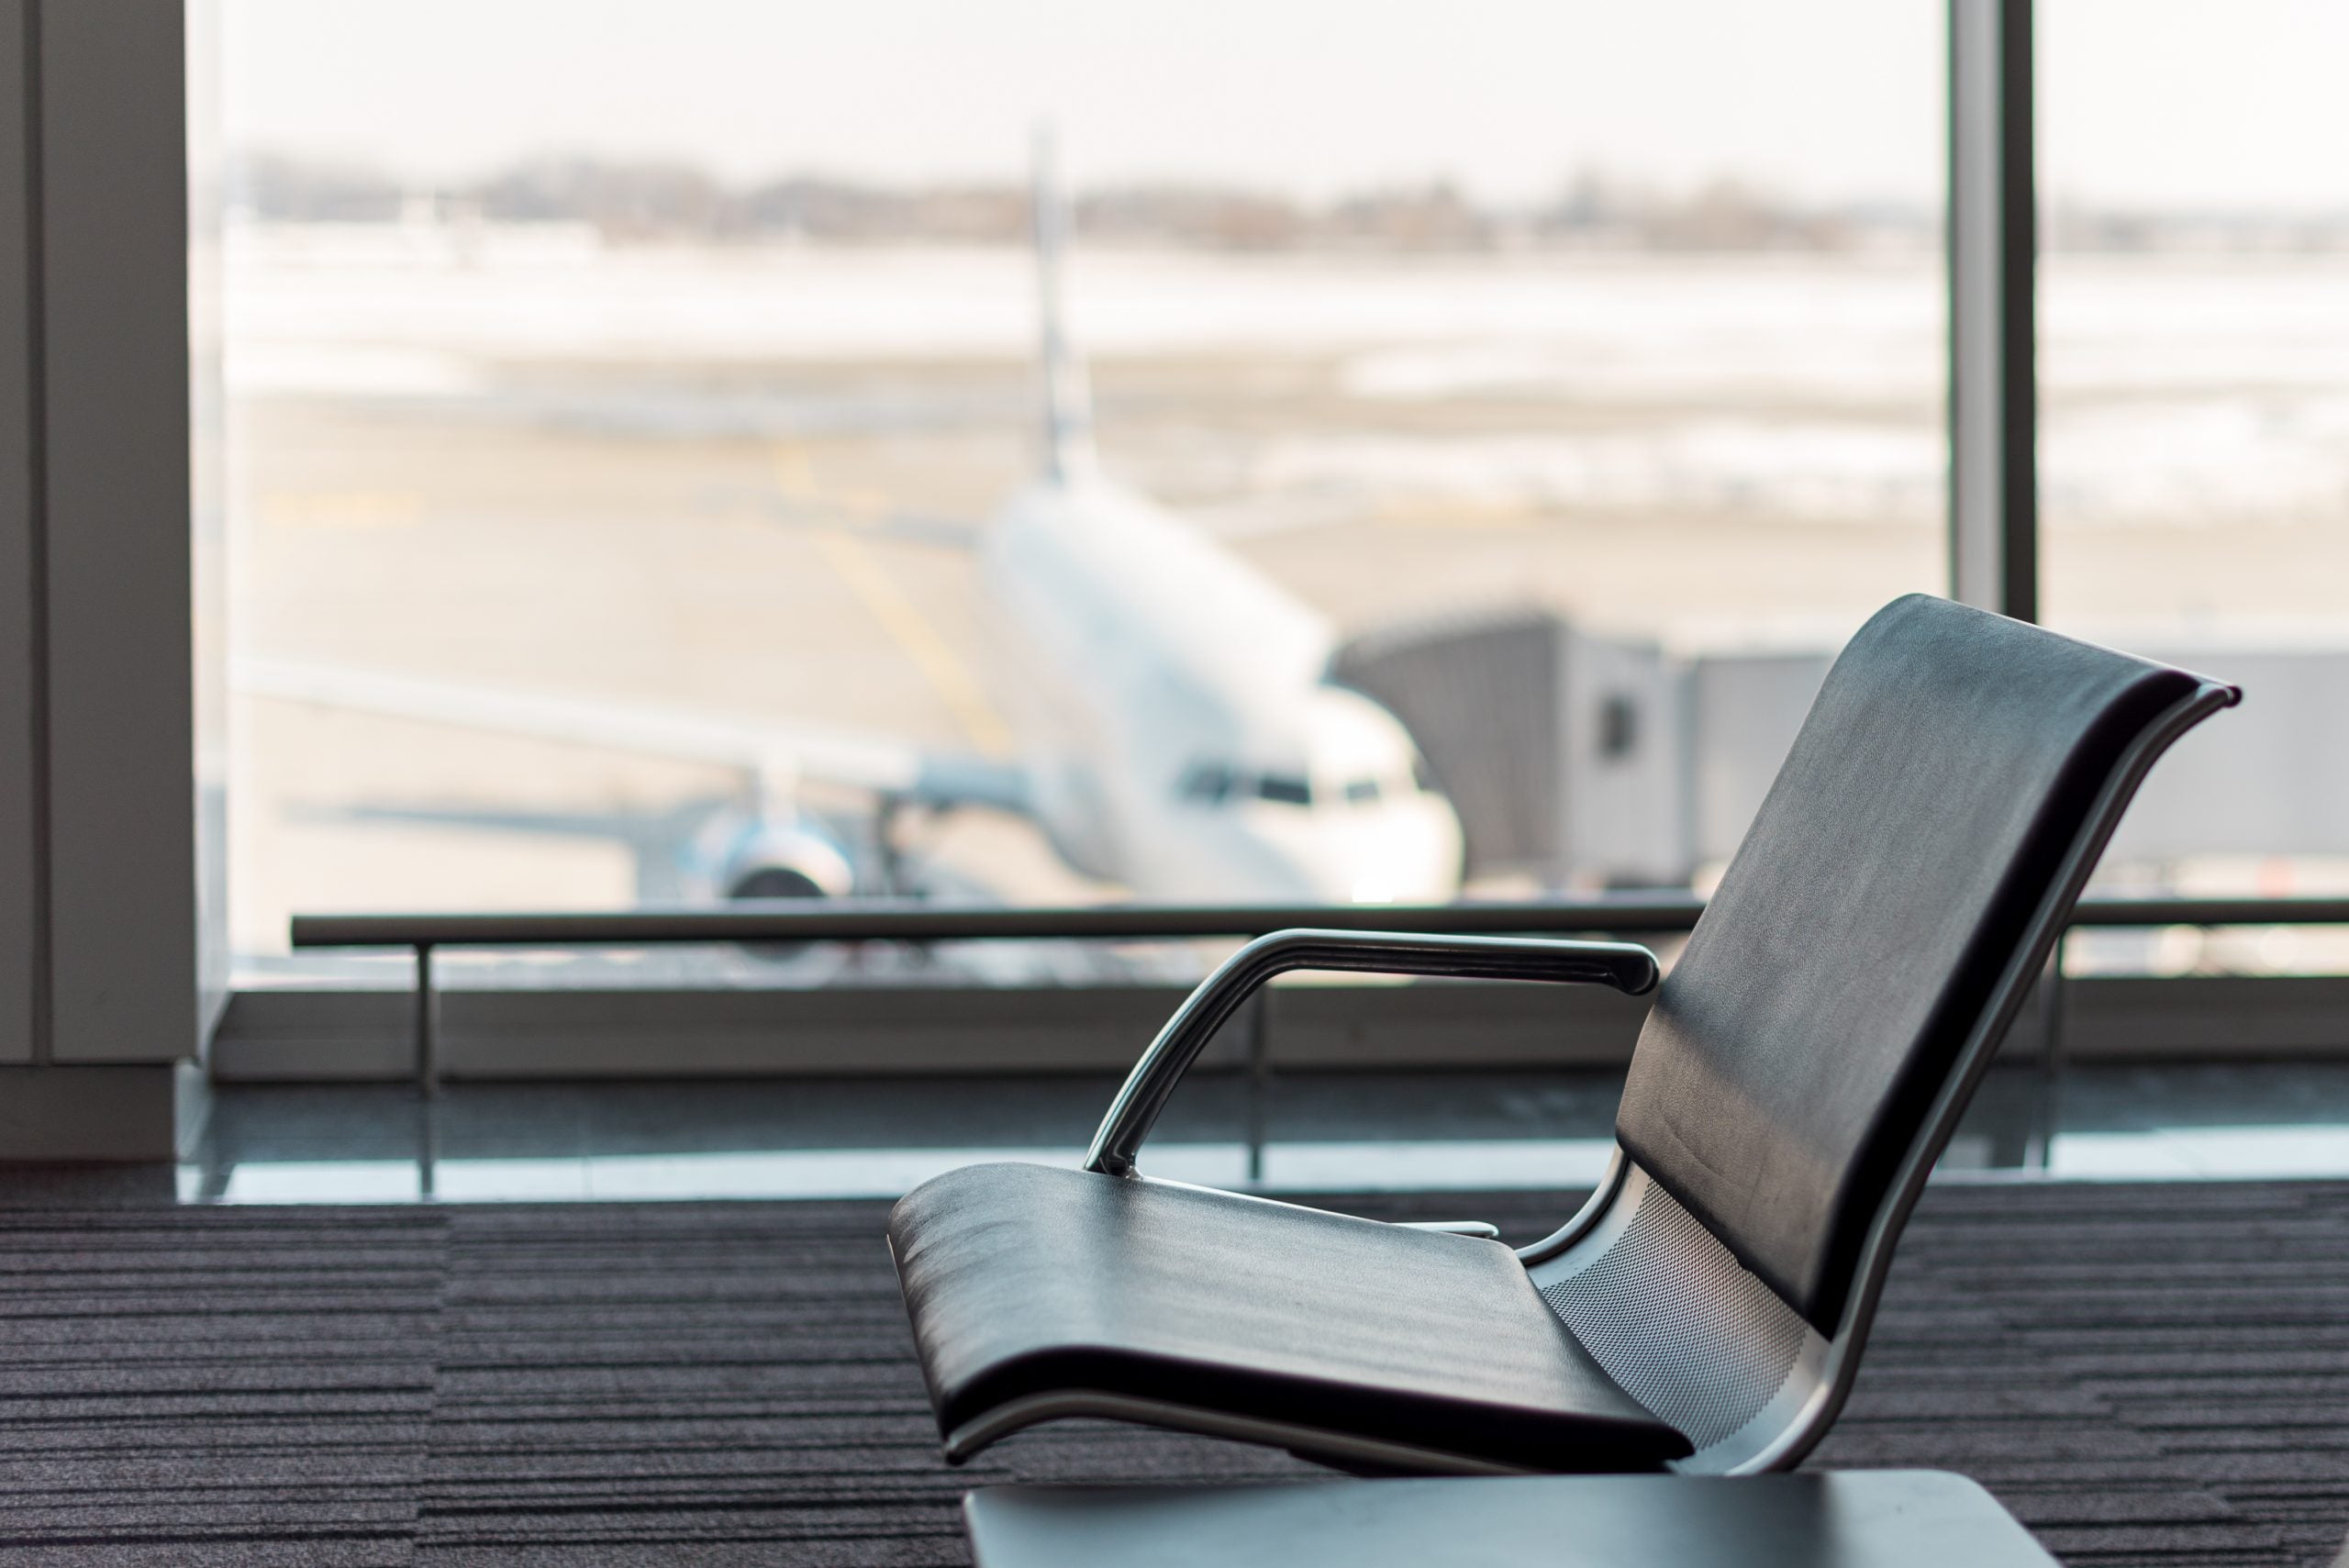 The waiting hall in airport terminal, focus on the seats and blurred aircraft behind the window. Vacation concept, beautiful summer travel background